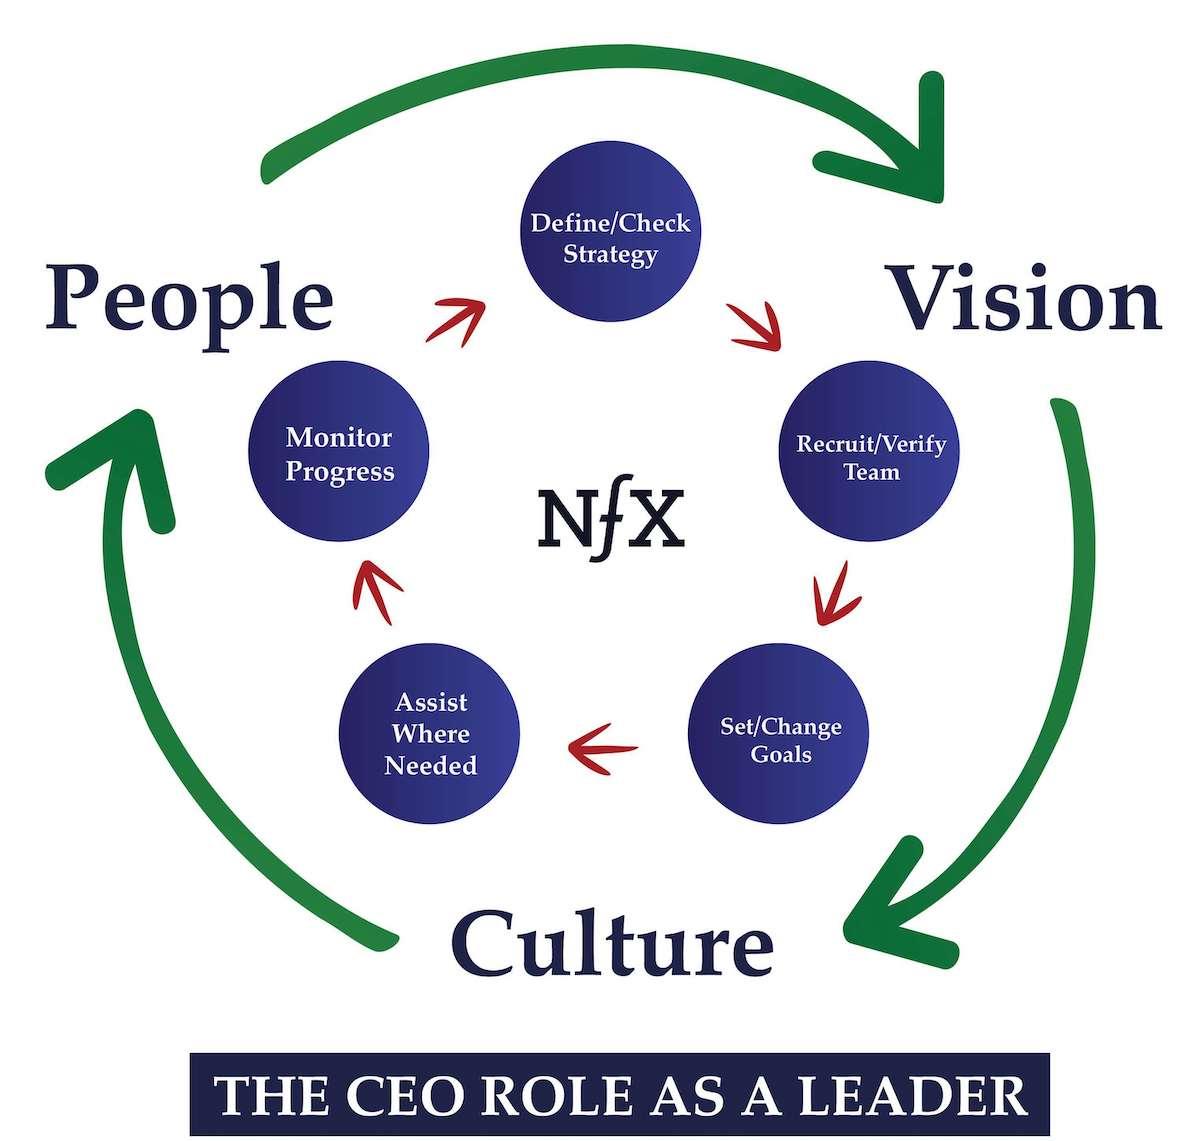 The CEO Role as a Leader